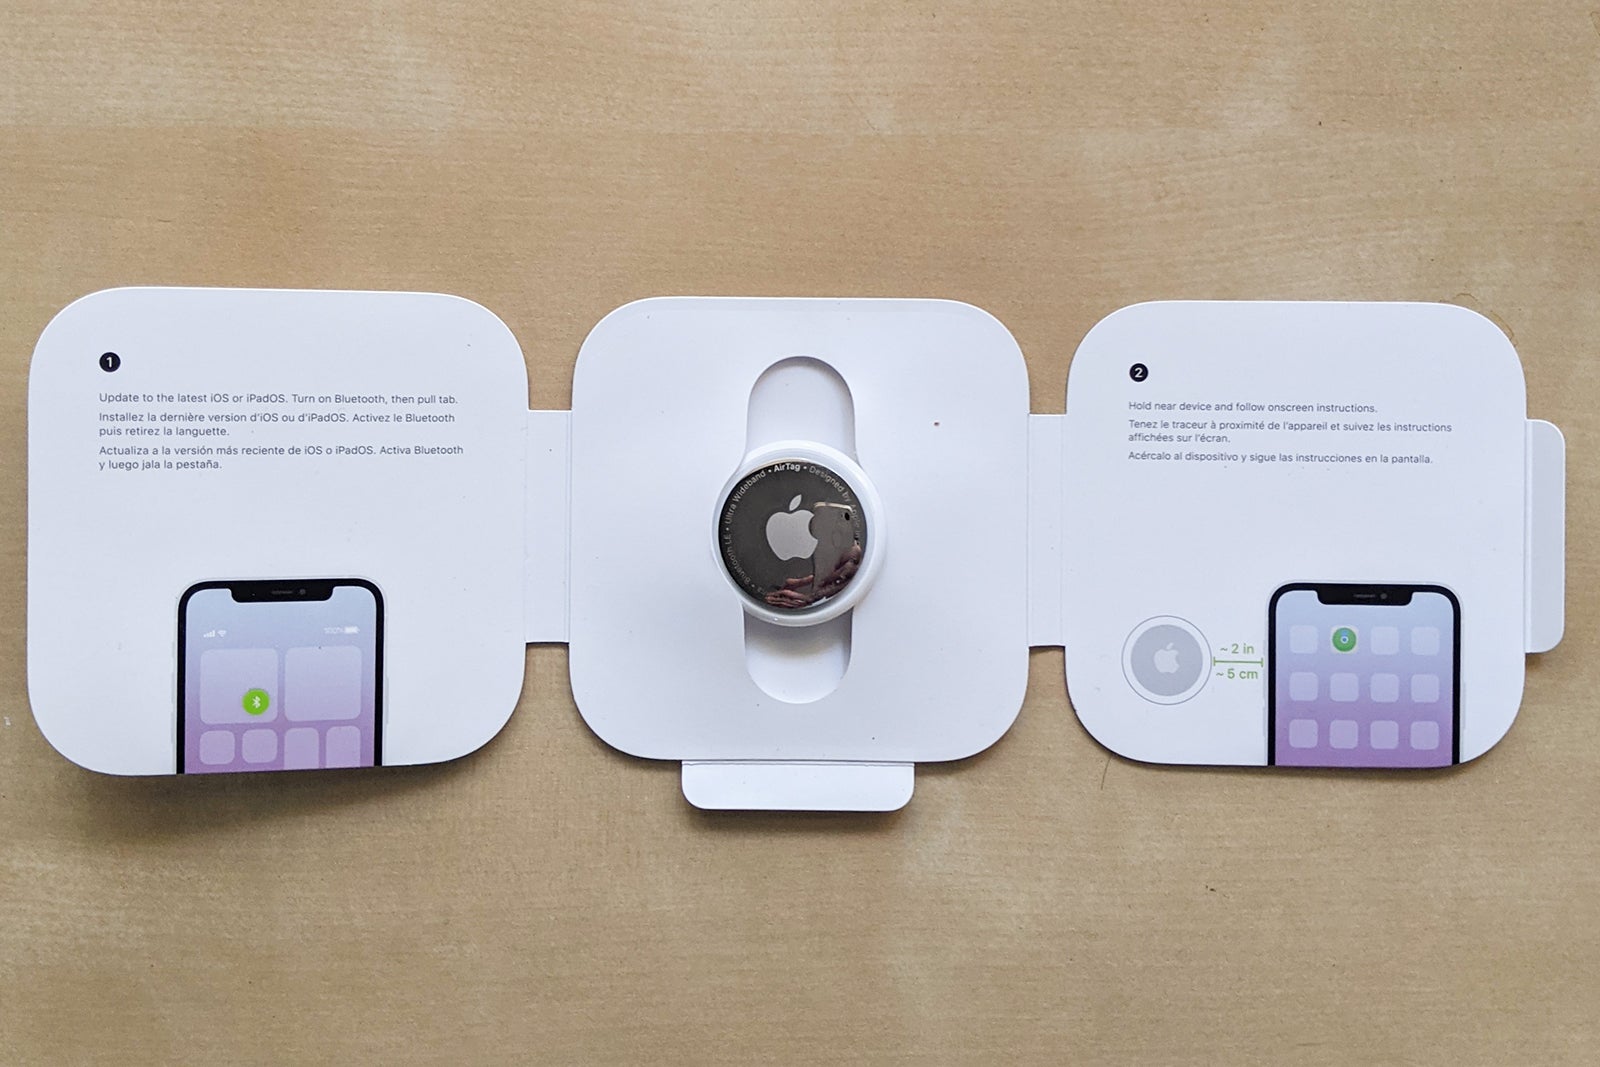 How to set up Apple's AirTag